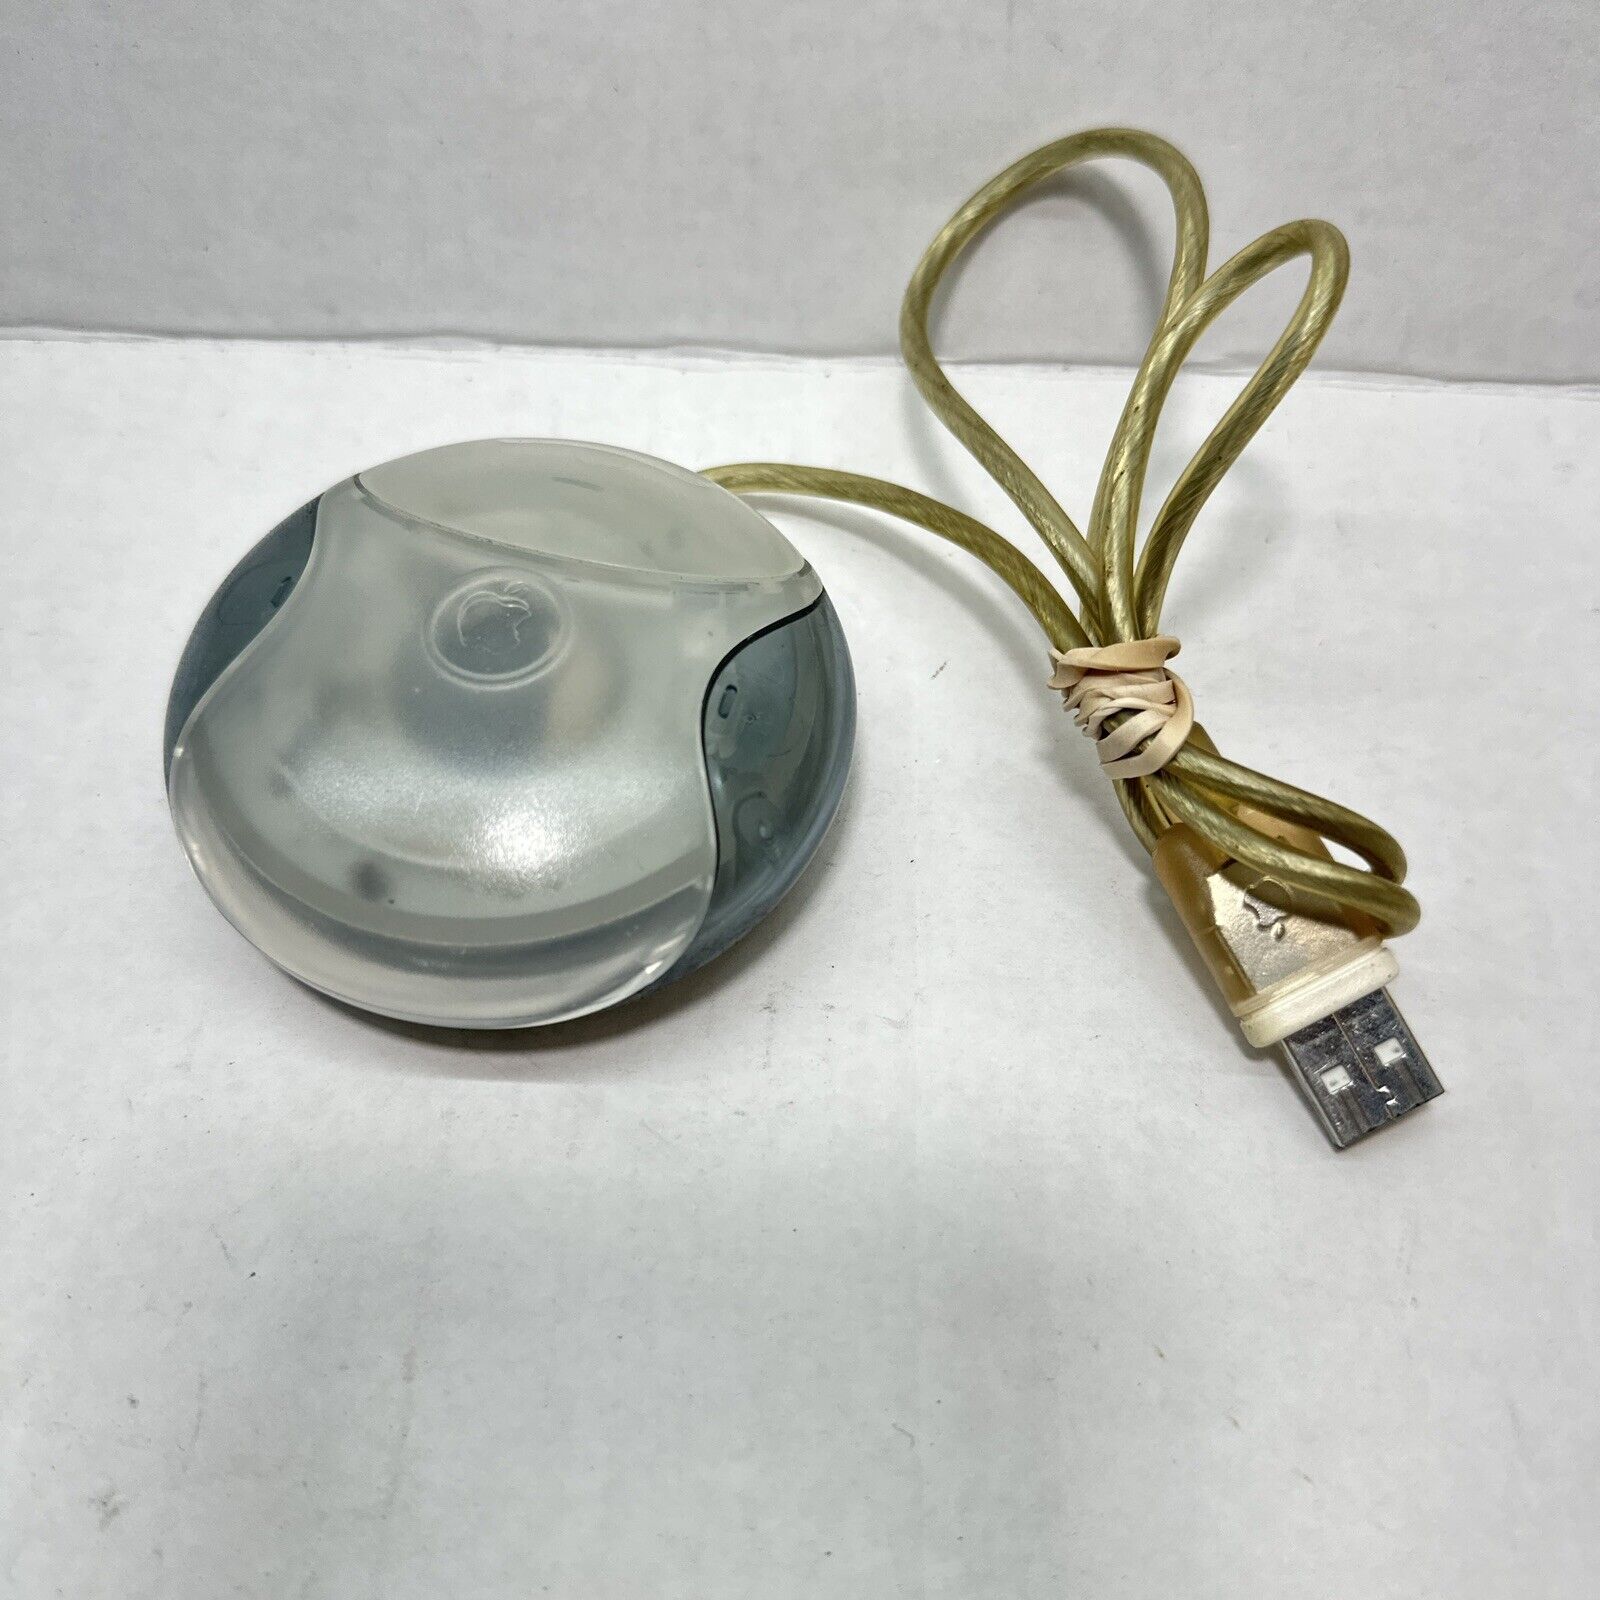 Vintage Apple M4848 Blue/Teal iMac Hockey Puck USB Wired Mouse - Works